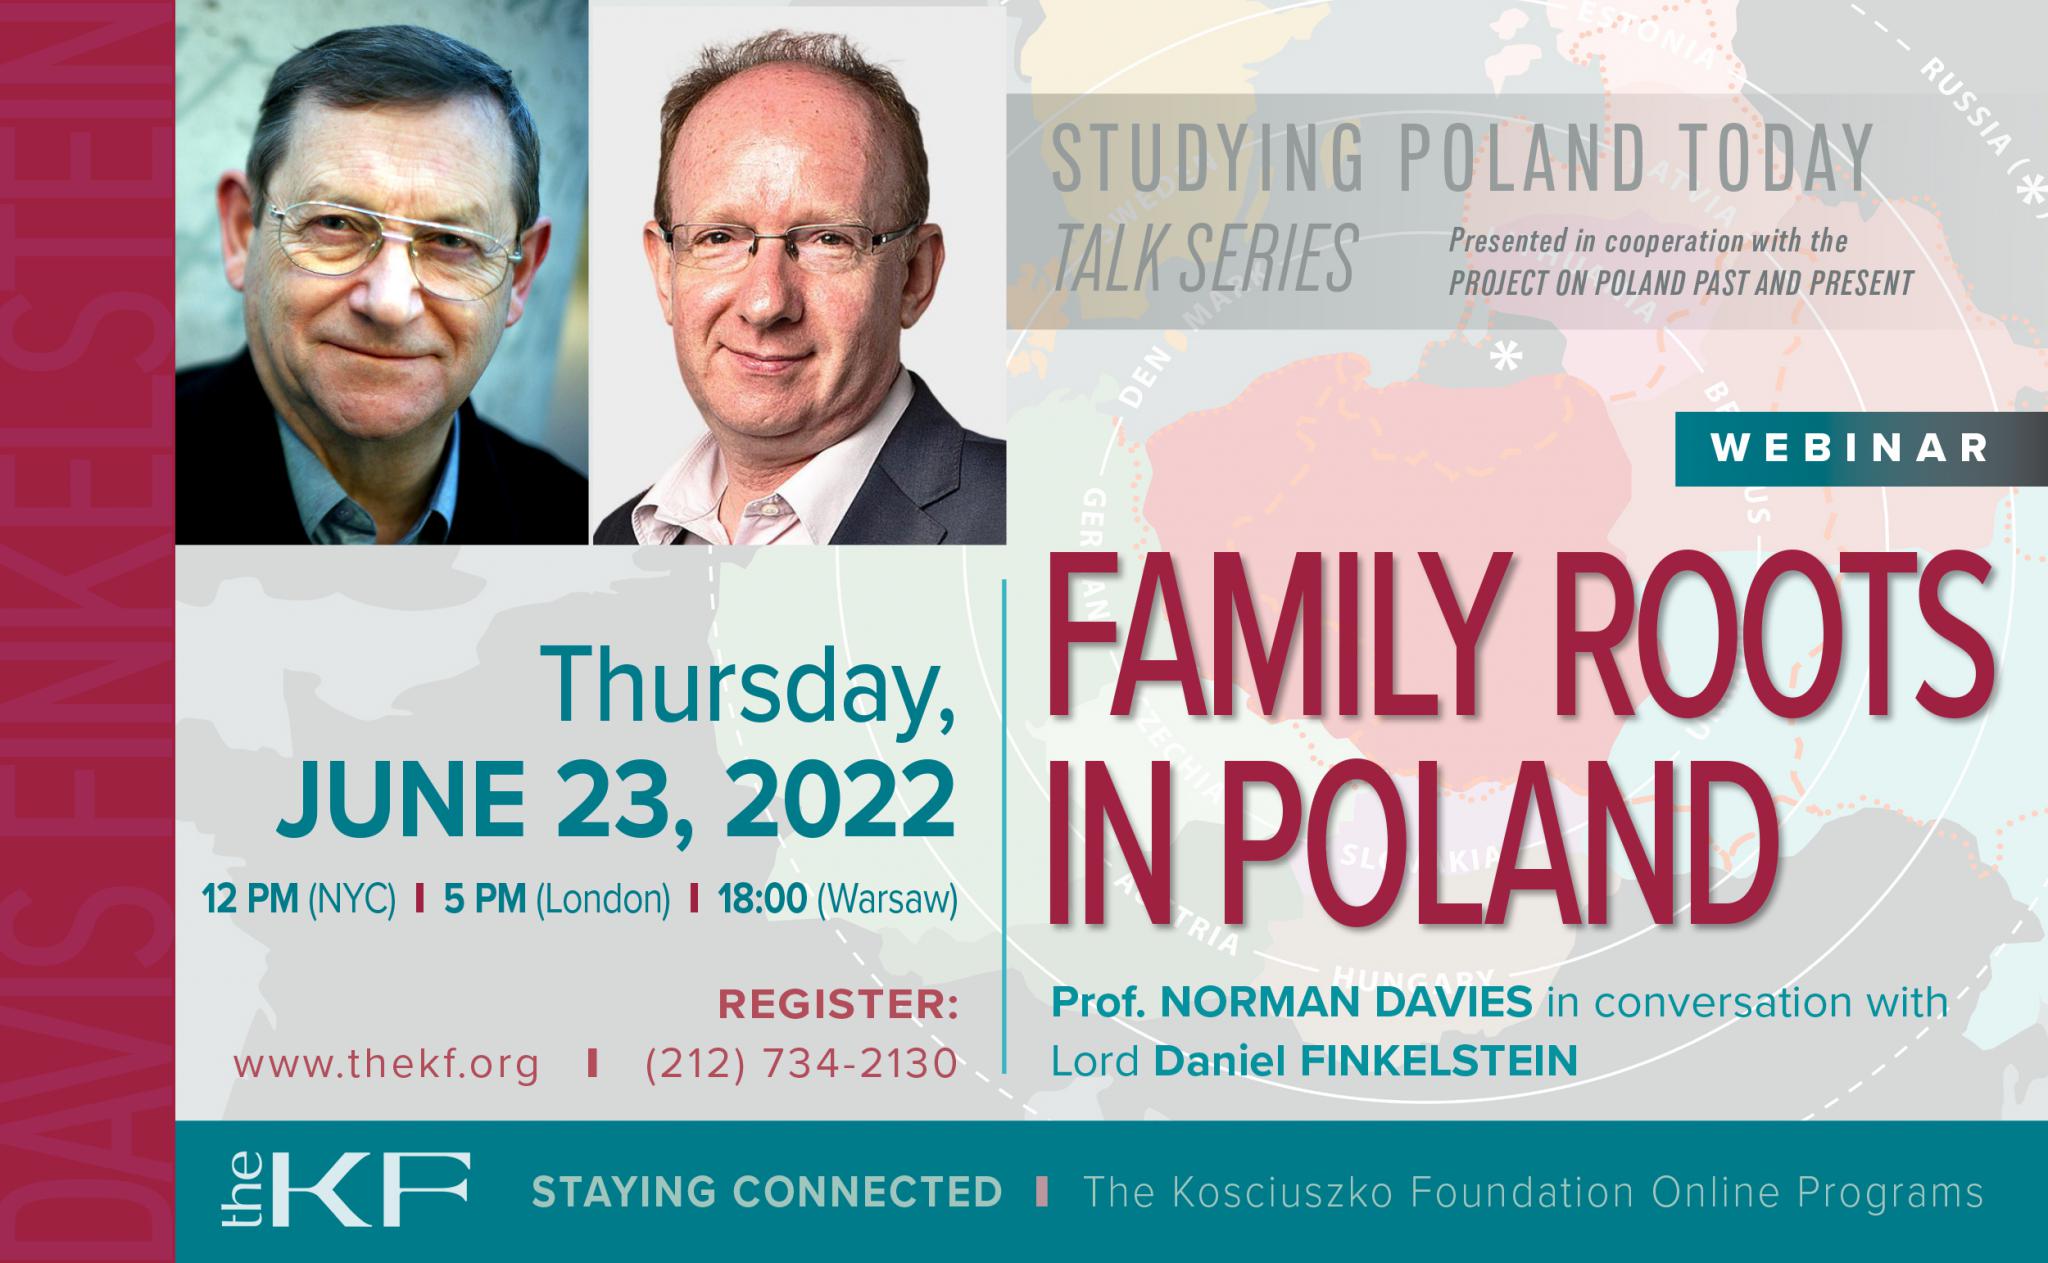 Webinar Family Roots in Poland. Prof. Norman Davies in conversation with Lord Daniel Finkelstein